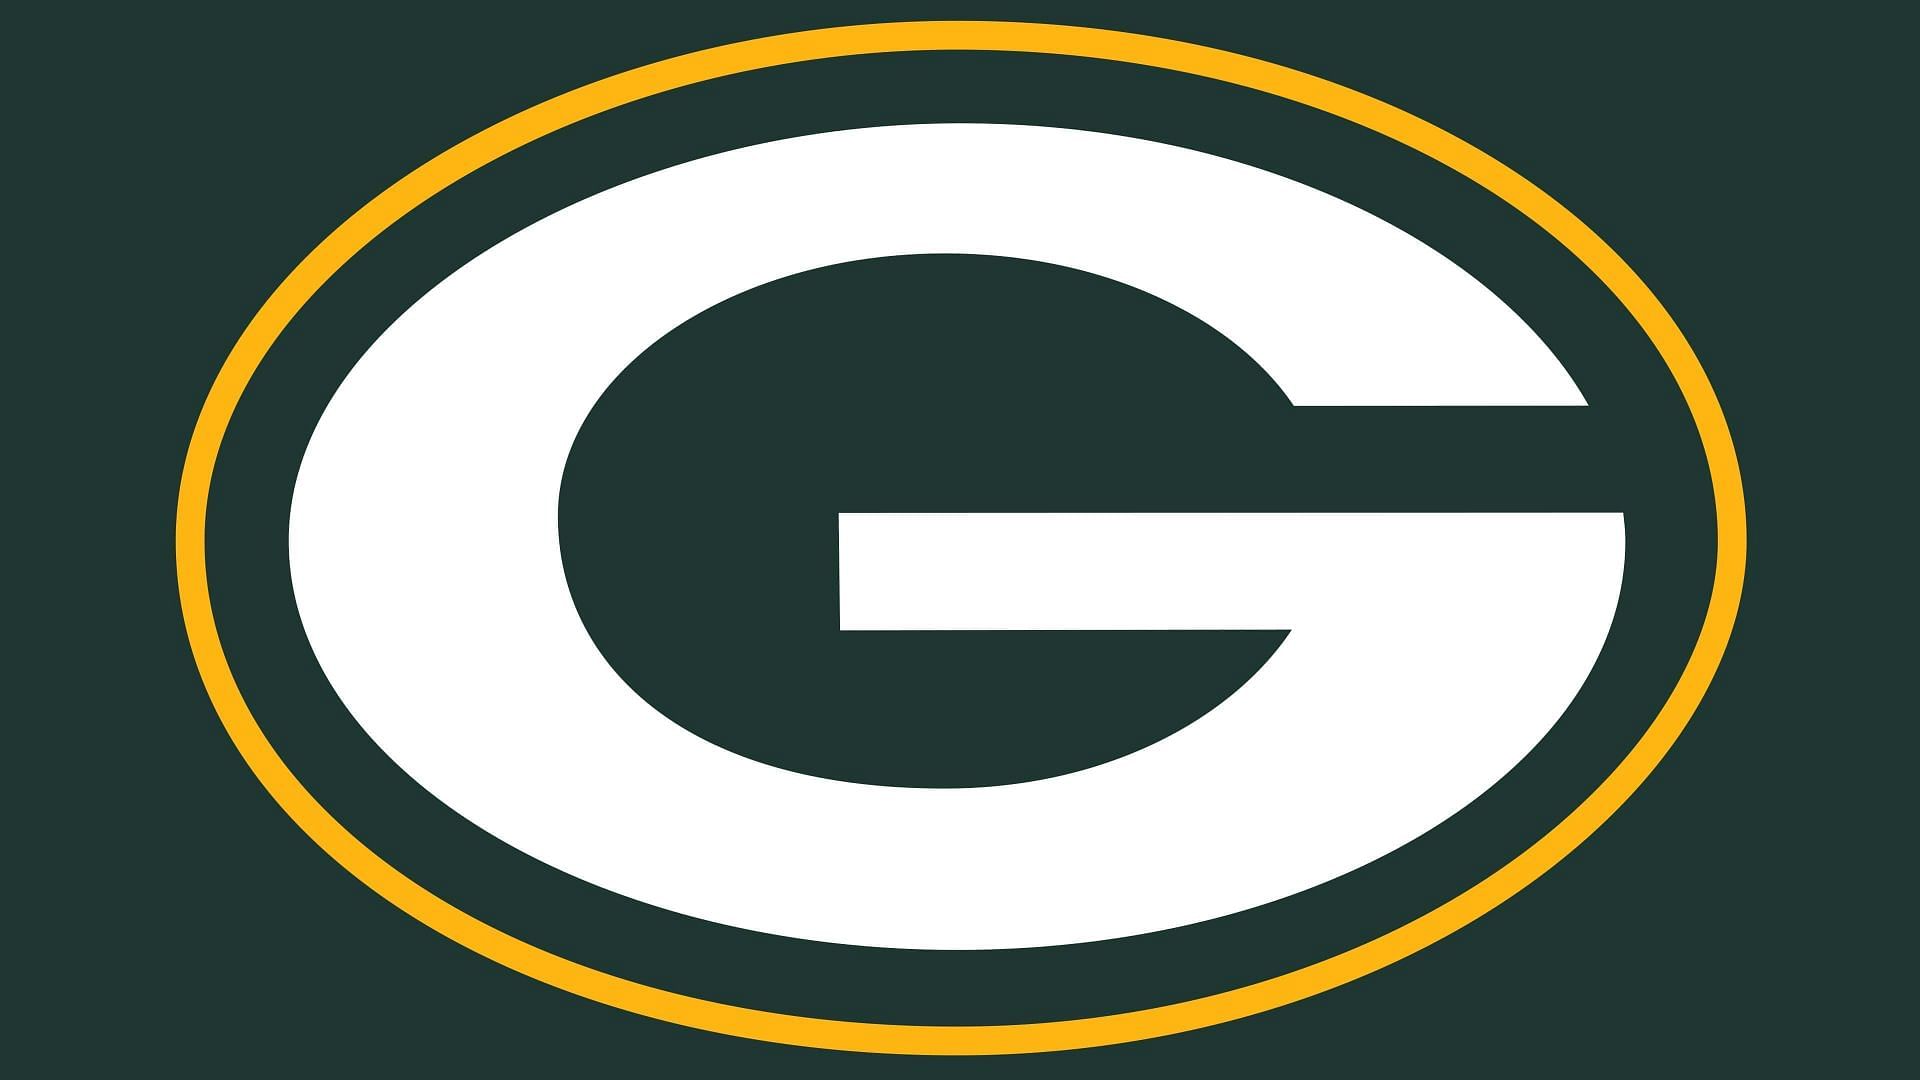 Green bay Packers